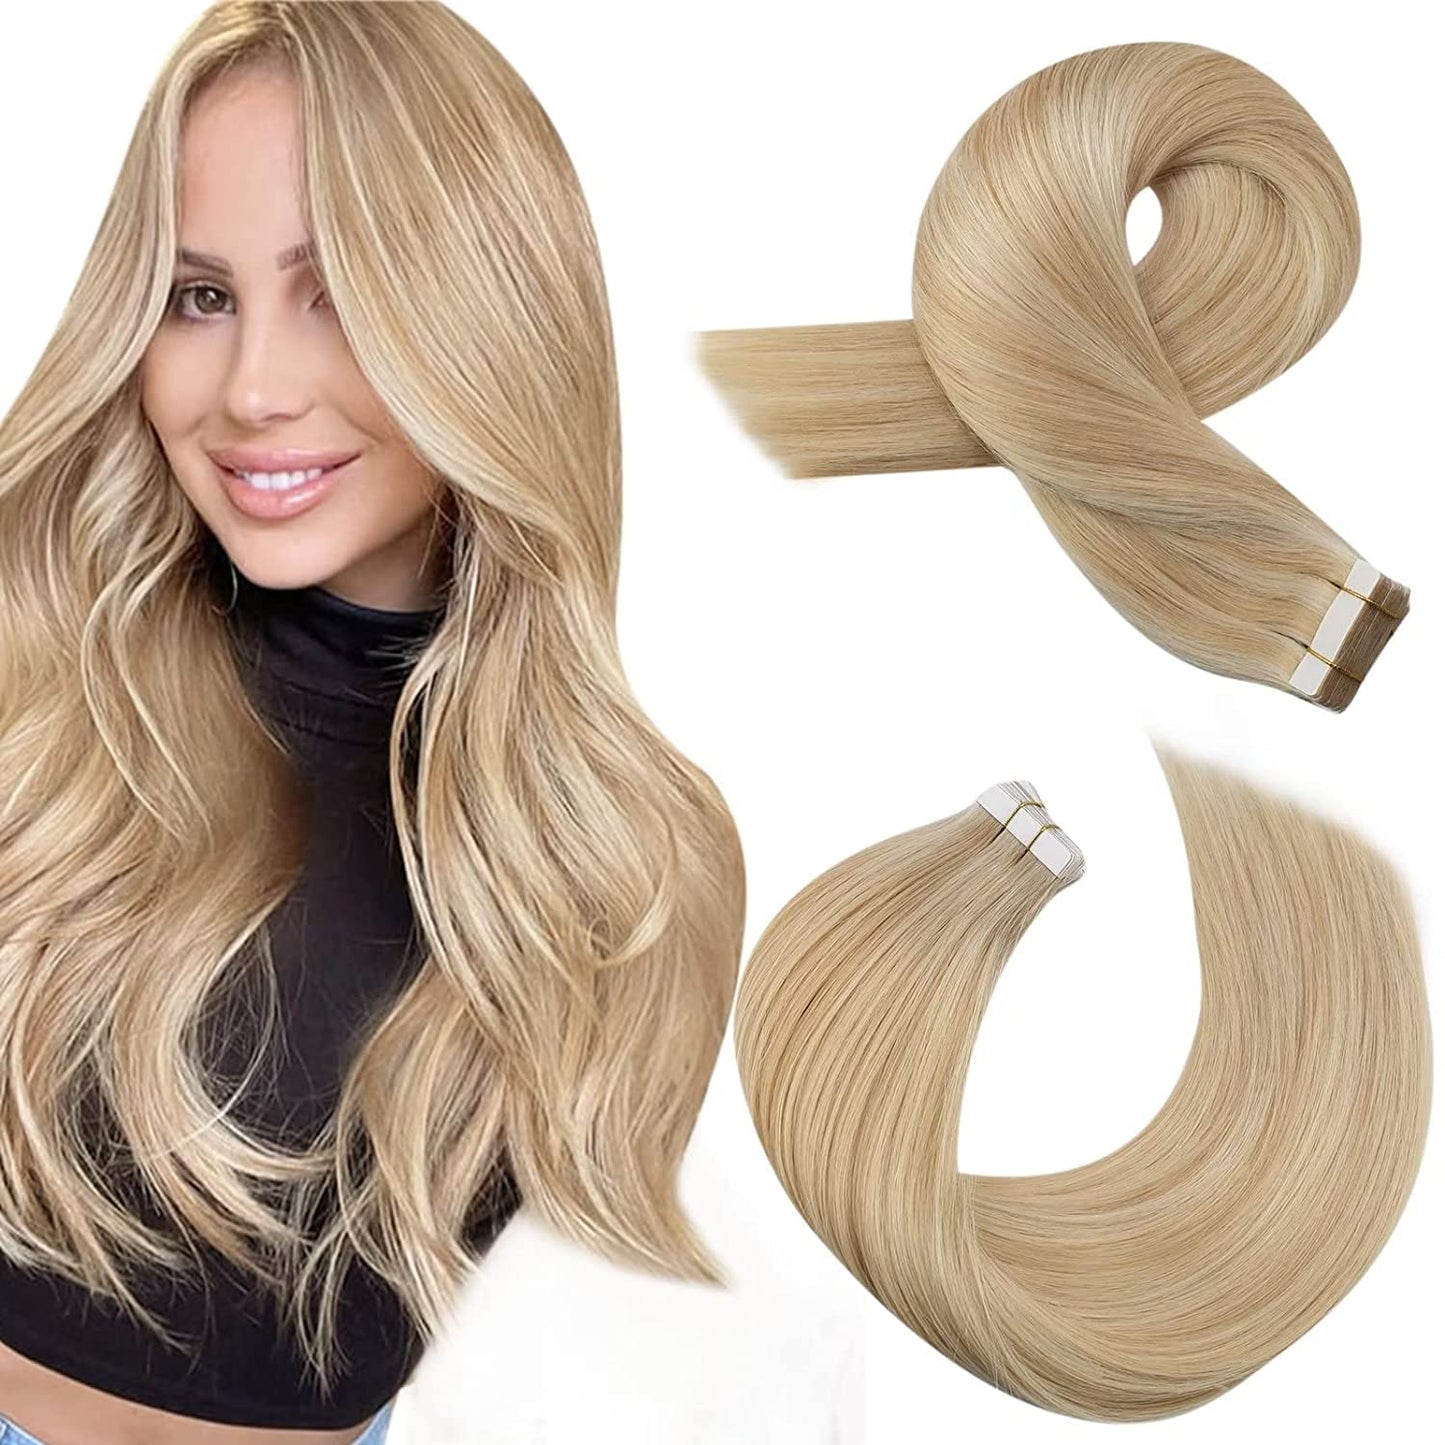 Moresoo Tape in Human Hair Extensions Balayage Blonde Hair Remy Hair Natural Soft Skin Weft Straight Seamless Hair Tape in Hair